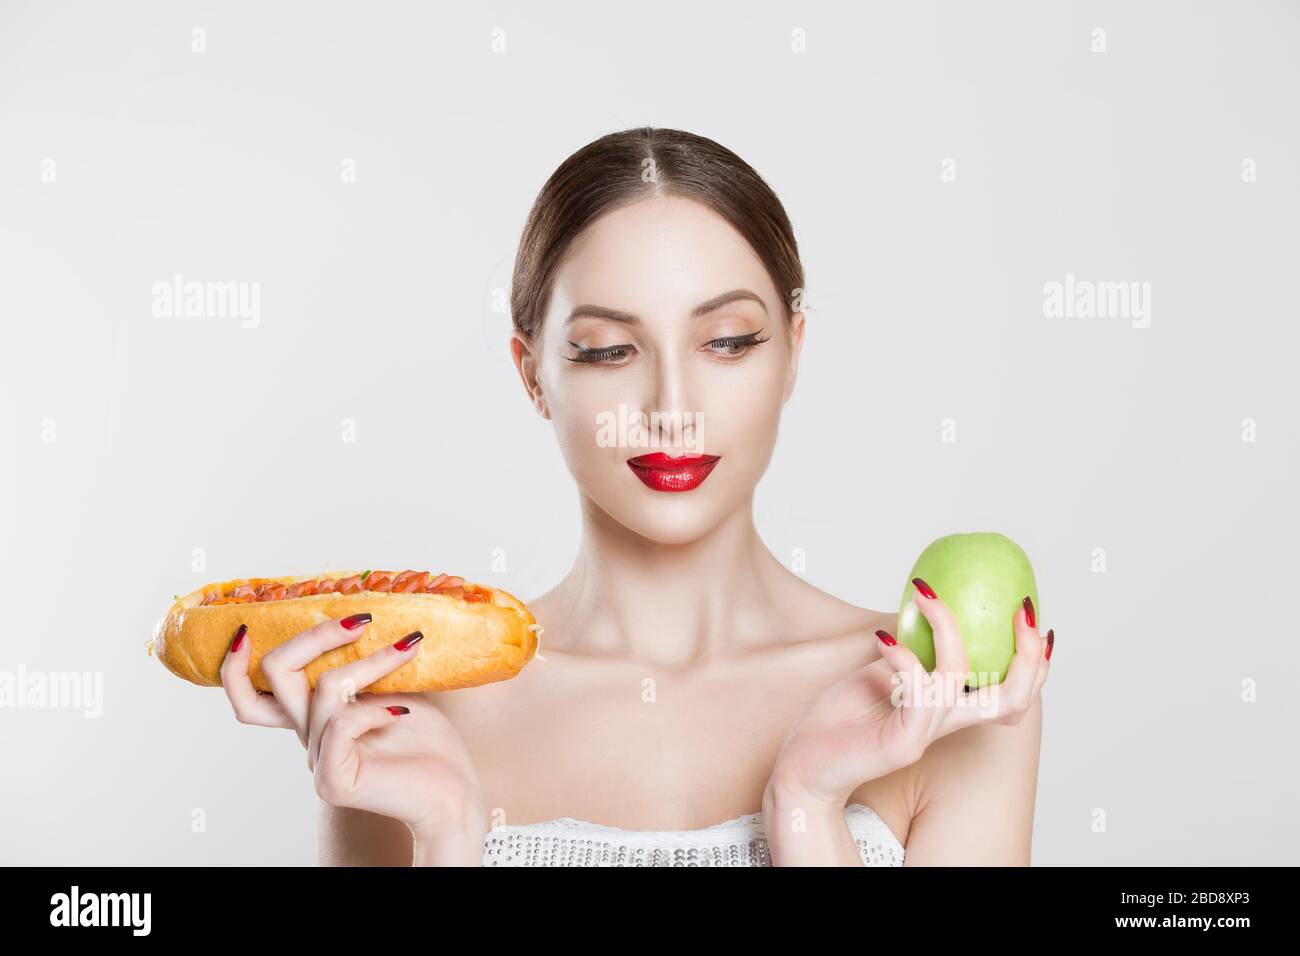 Woman compare tasty unhealthy burger sandwich hotdog in hand and green apple getting ready to eat healthy food isolated on a white background, healthy Stock Photo